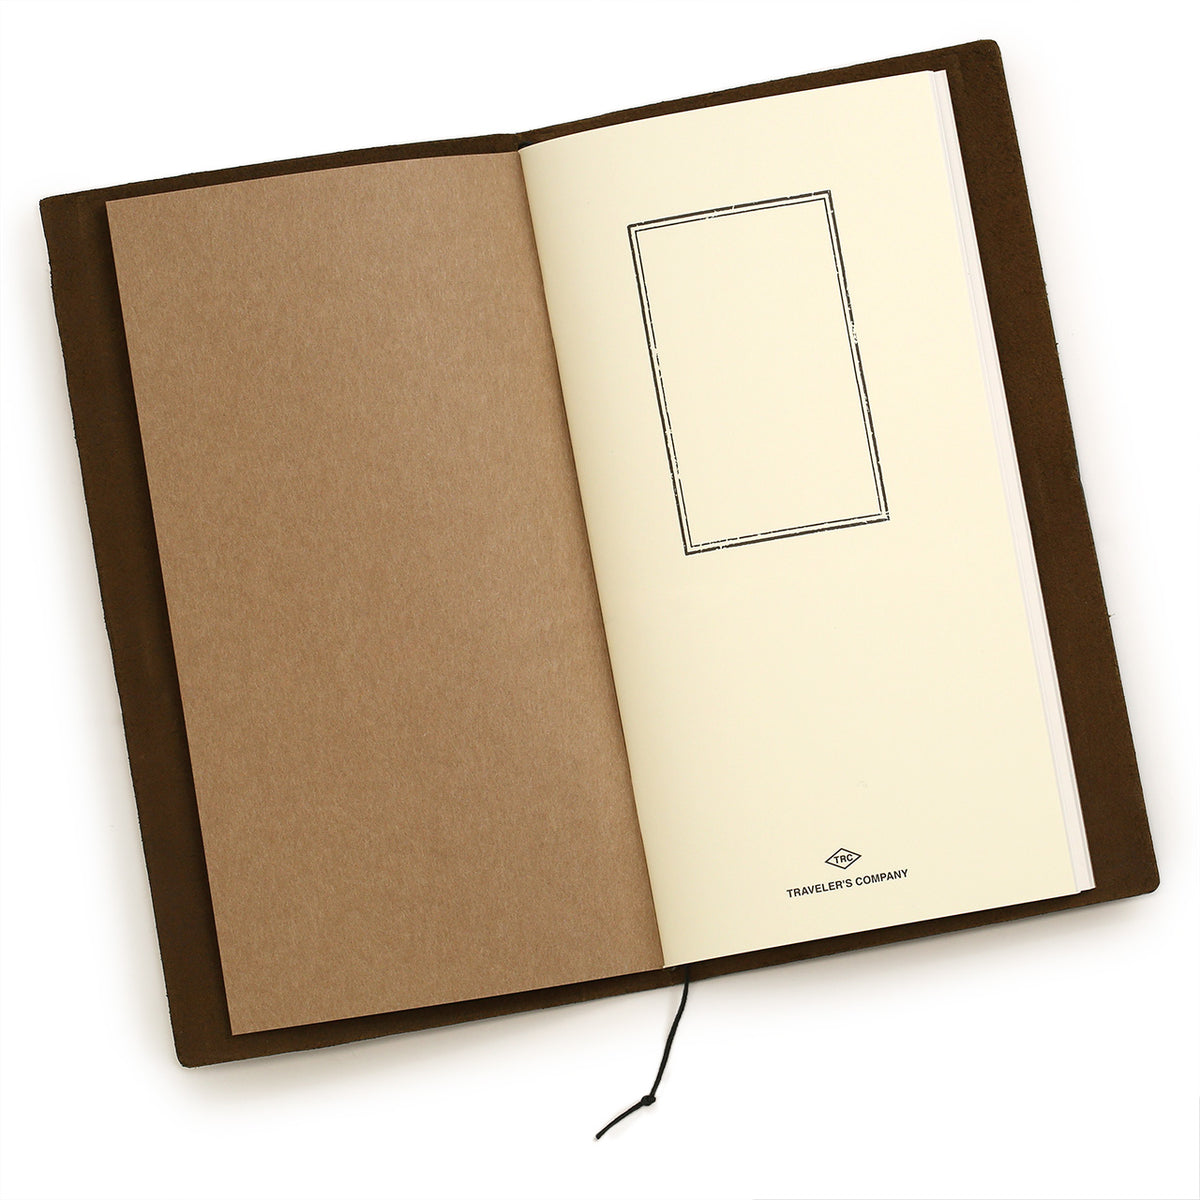 Regular sized notebook open to the first page showing the logo and a blank frame